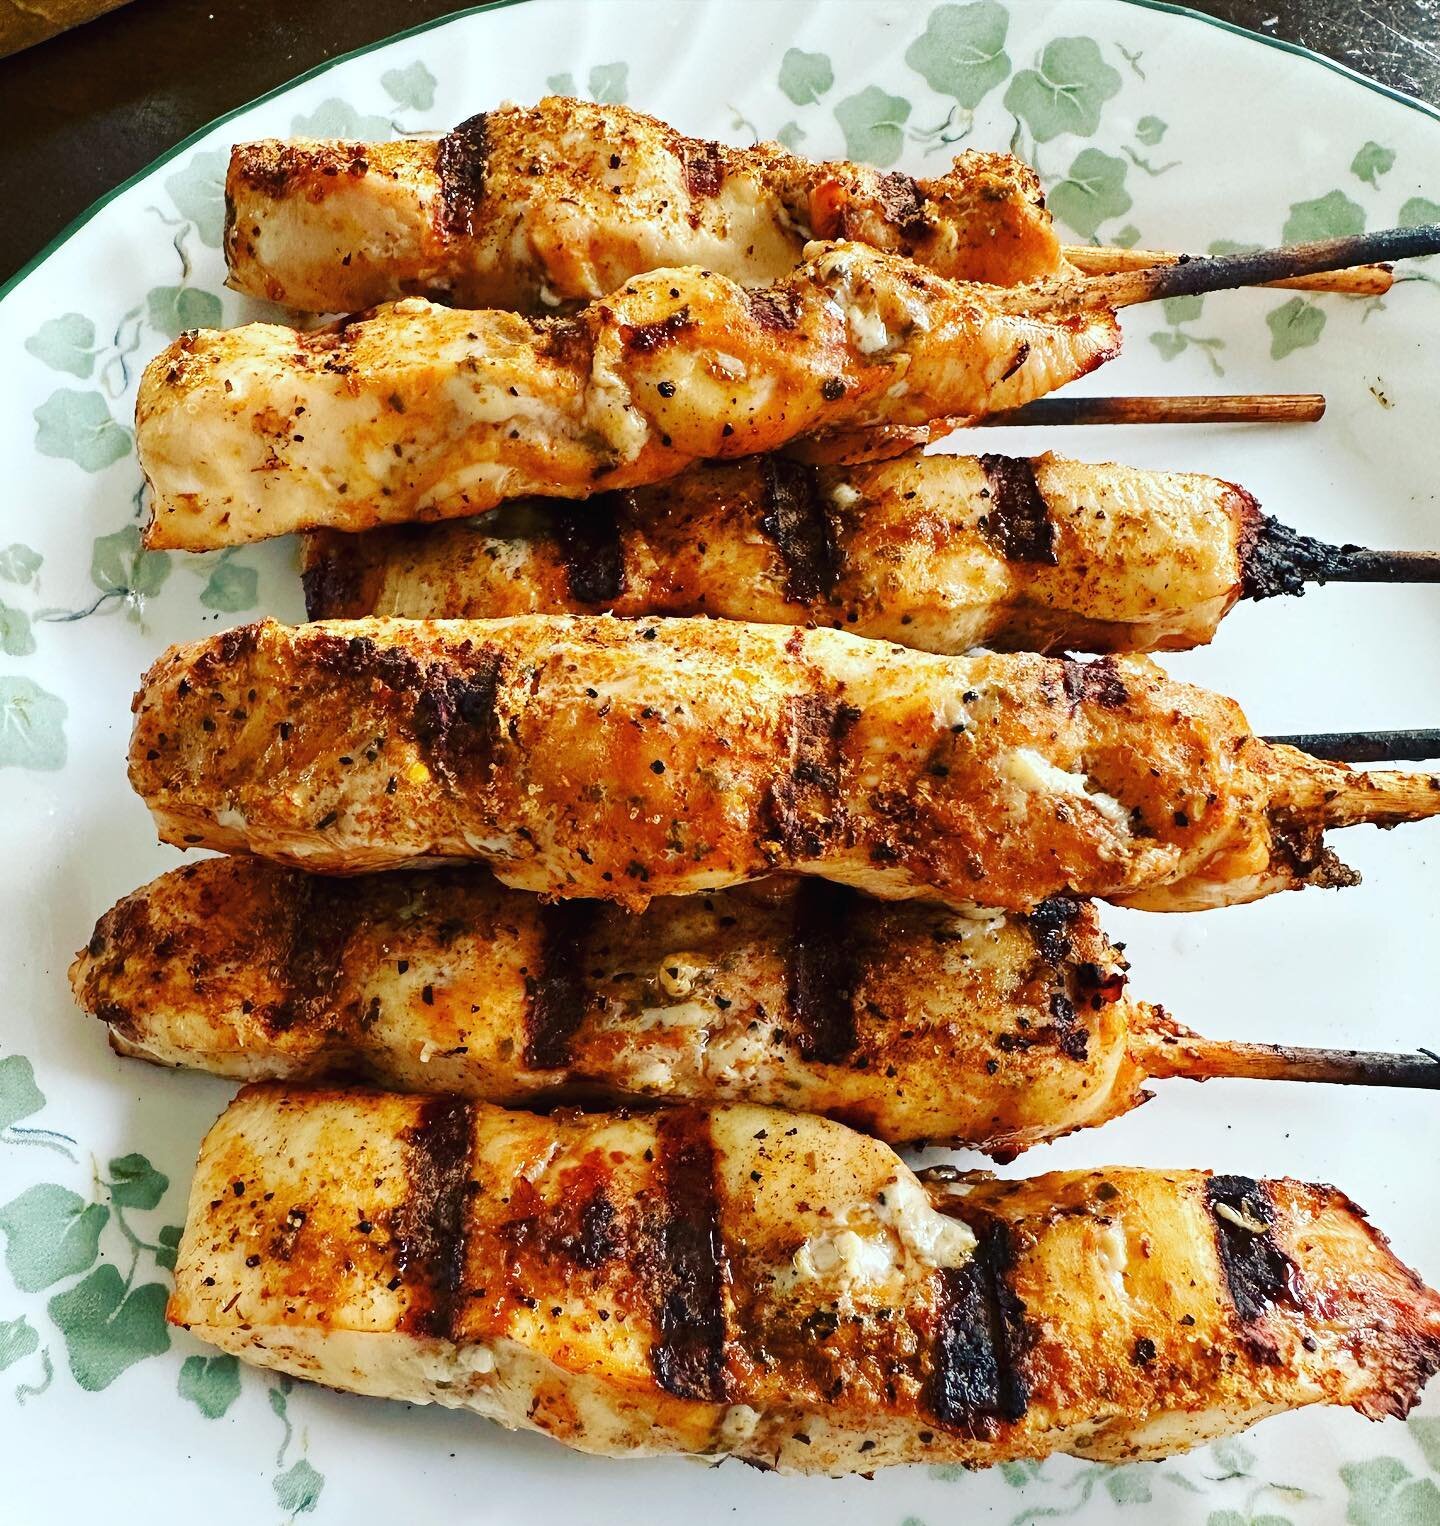 Quick fire chicken skewers for those nights when you don&rsquo;t have time for anything longer than 20 minutes&hellip; 

#bbq #backyardbbq #grilledchicken #bbqchicken #barbecue